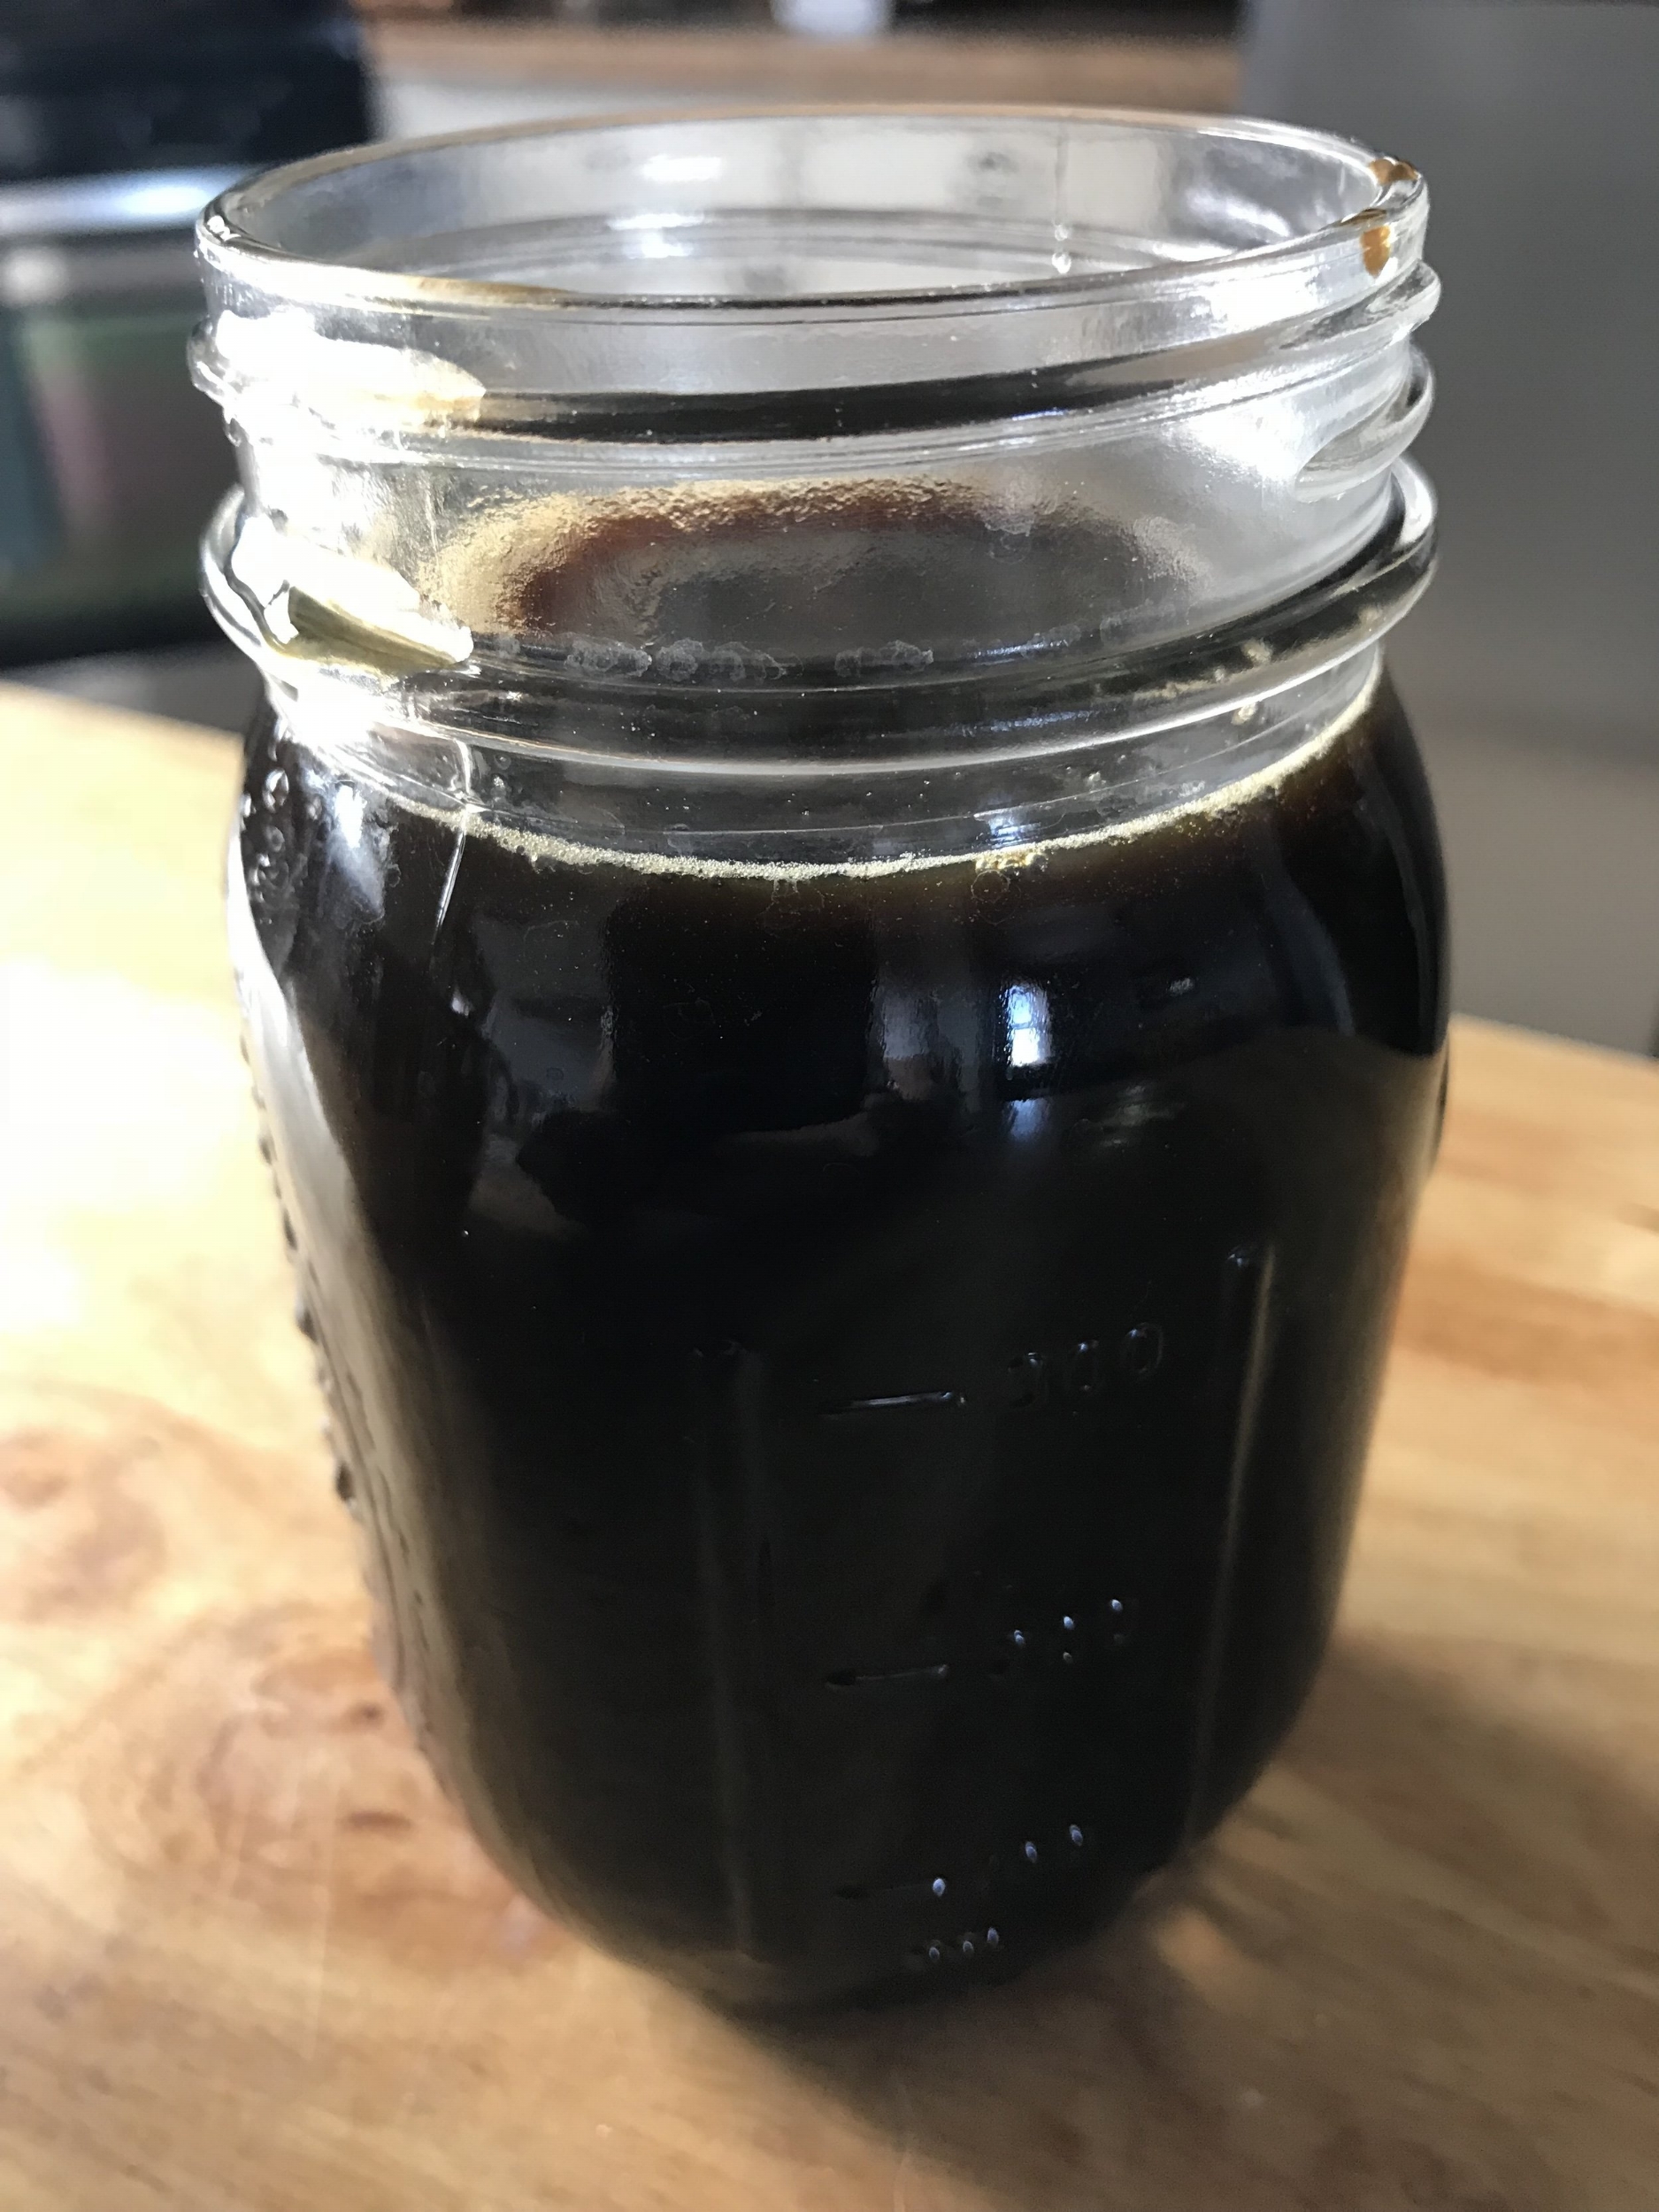 Water, coffee and molasses